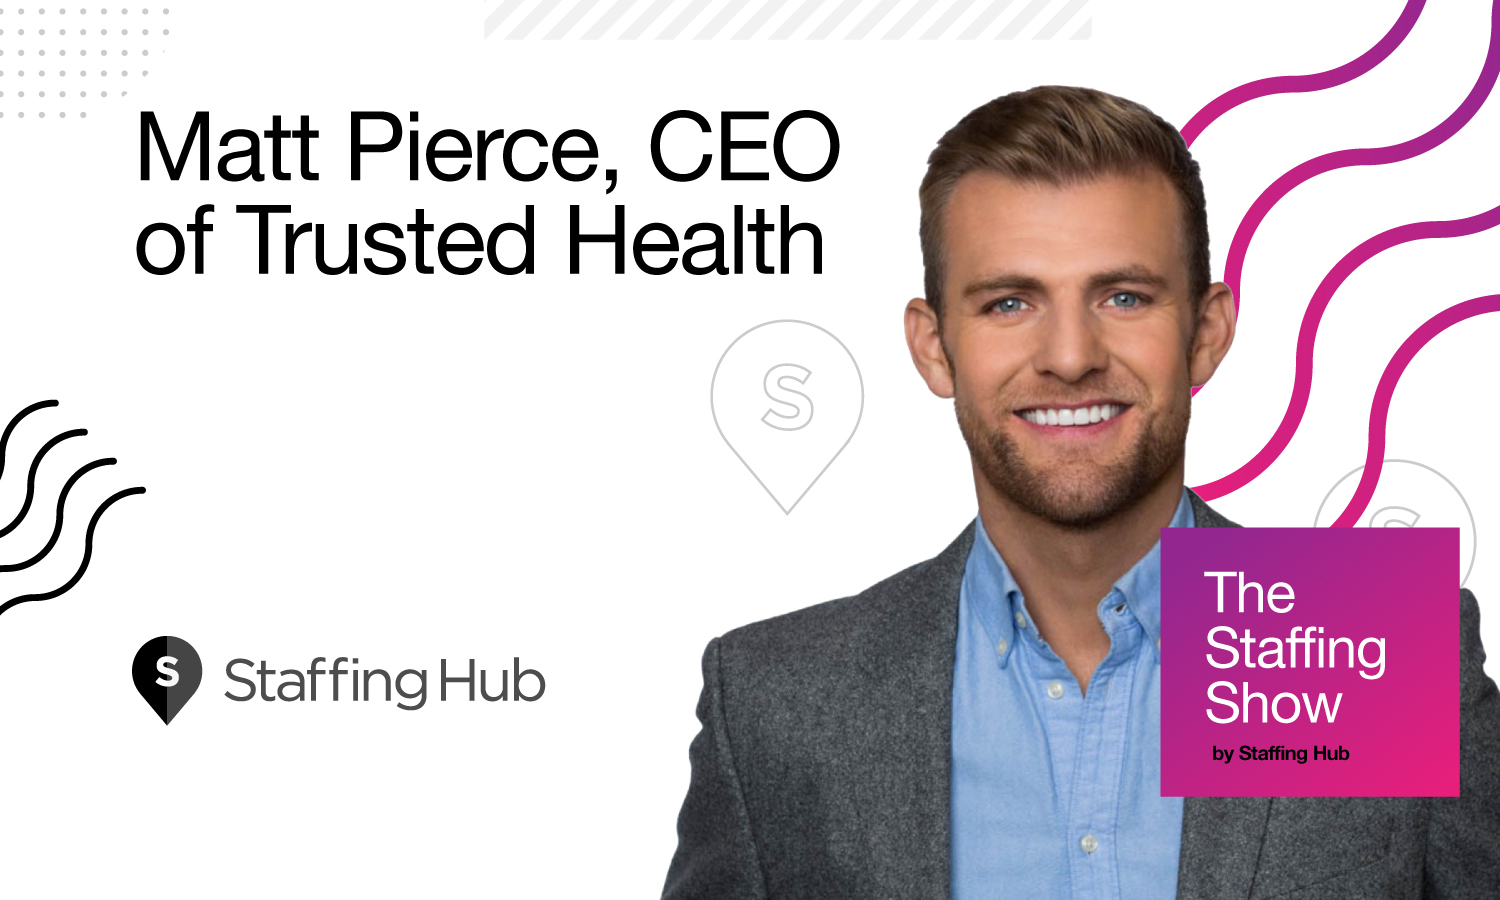 How a Medical Error Got Matt Pierce, CEO of Trusted Health, into the Healthcare Staffing Industry